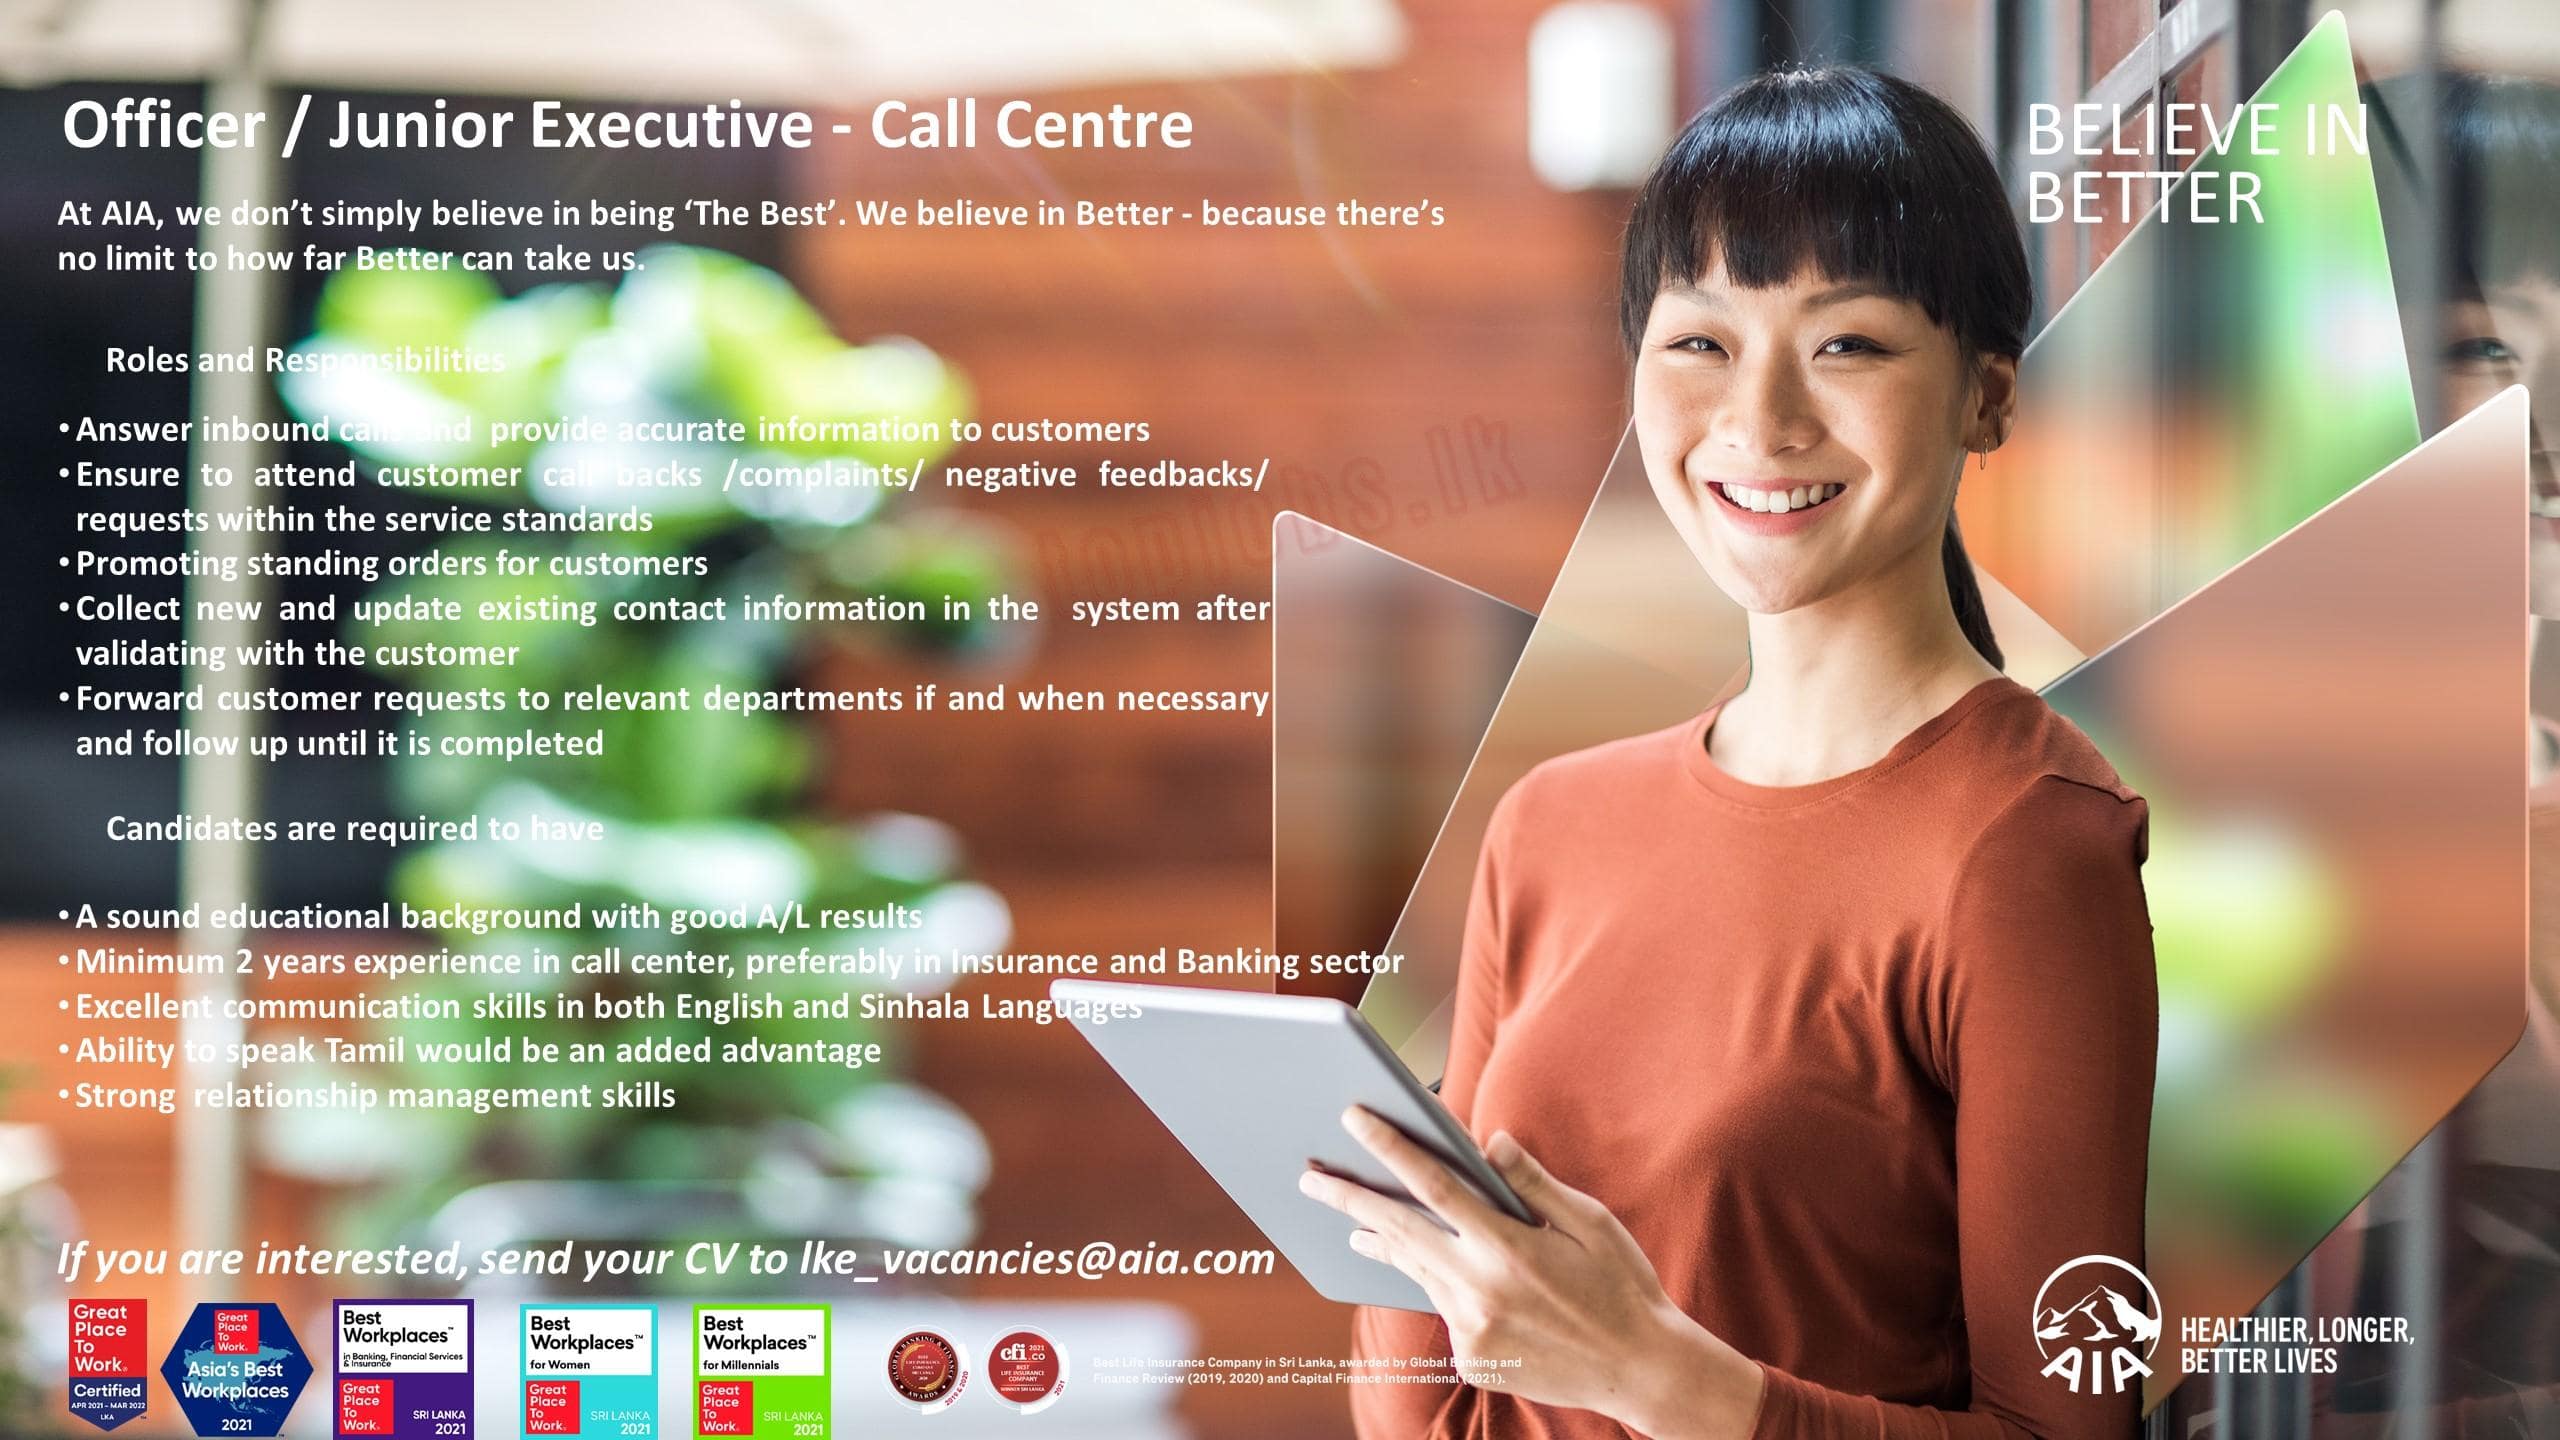 Officer / Junior Executive - Call Centre Job Vacancy in AIA